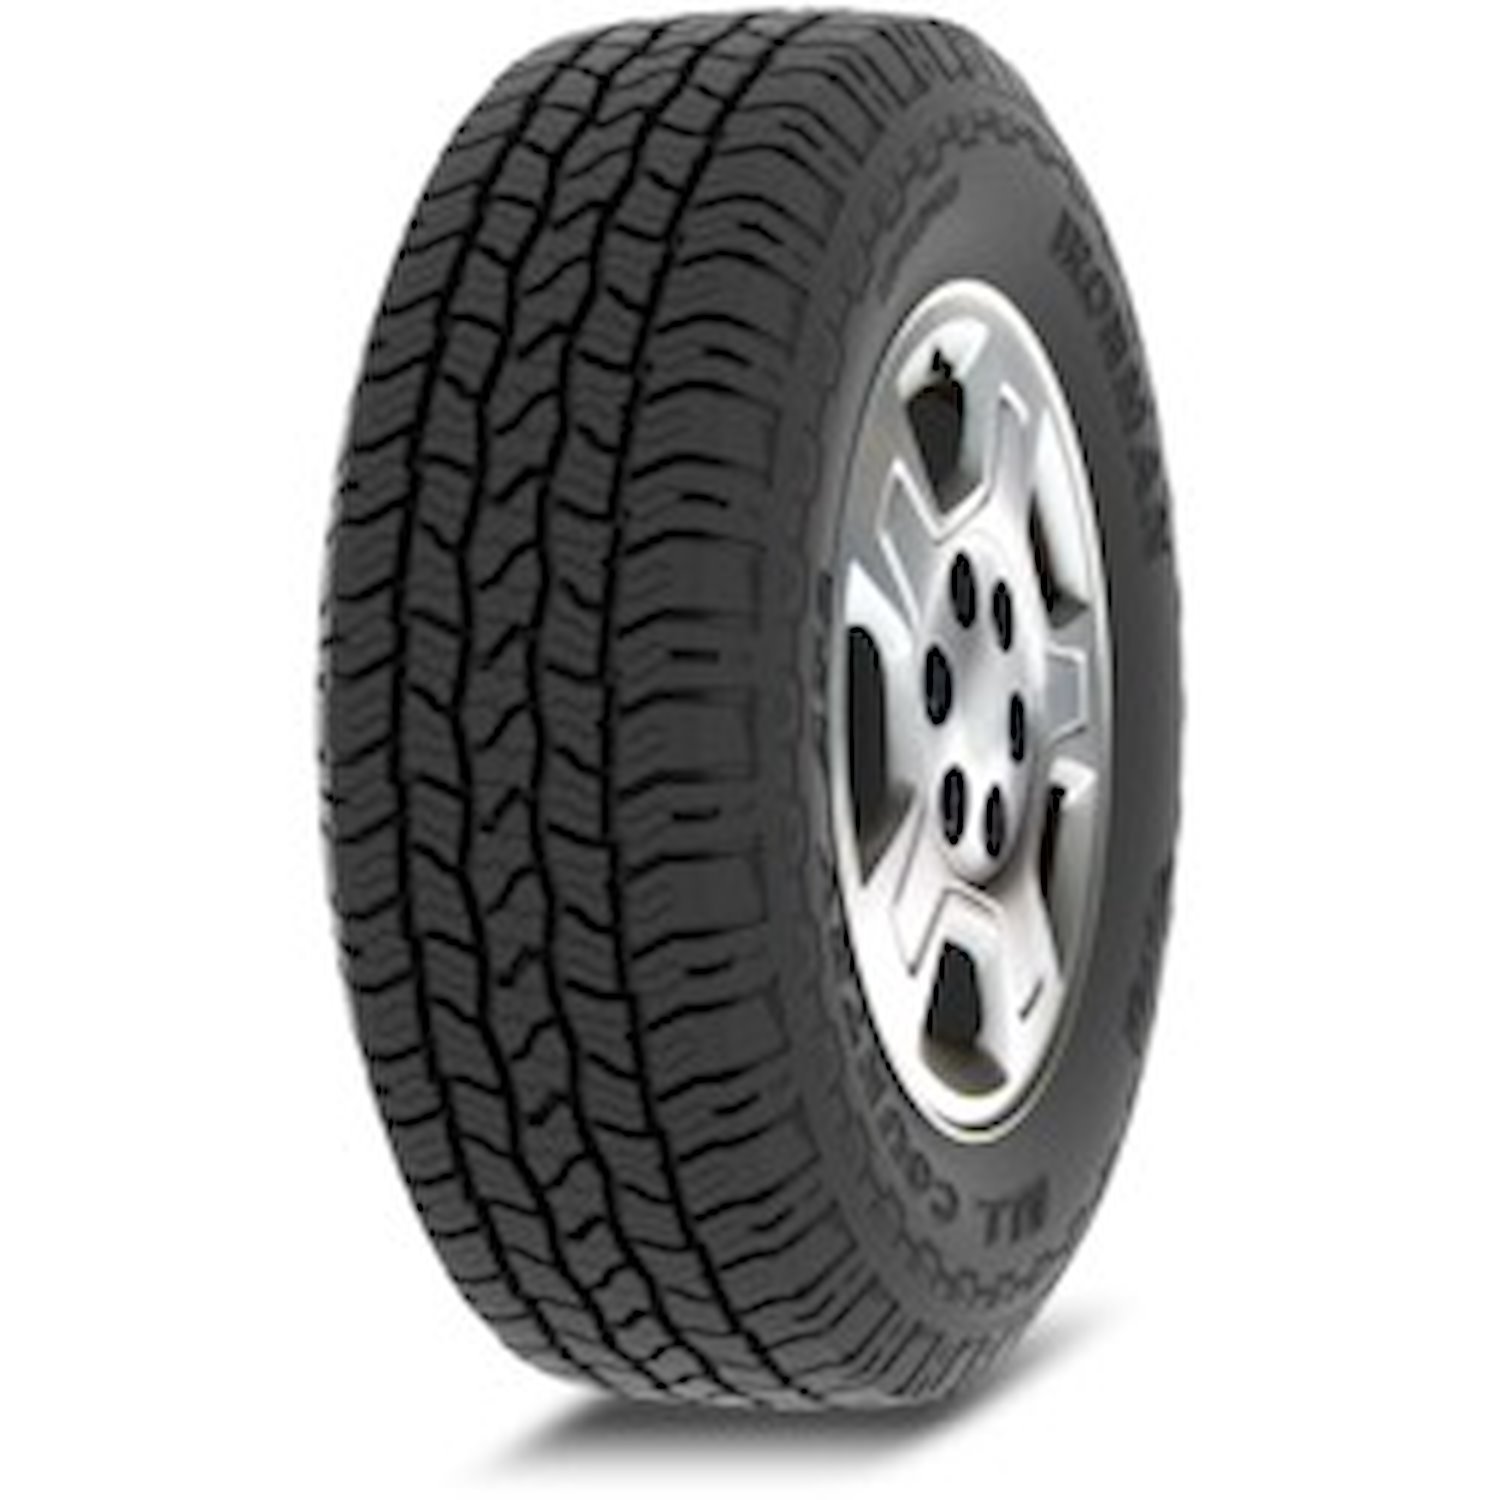 07662 All Country AT2 Tire, LT215/85R16, 115/112R